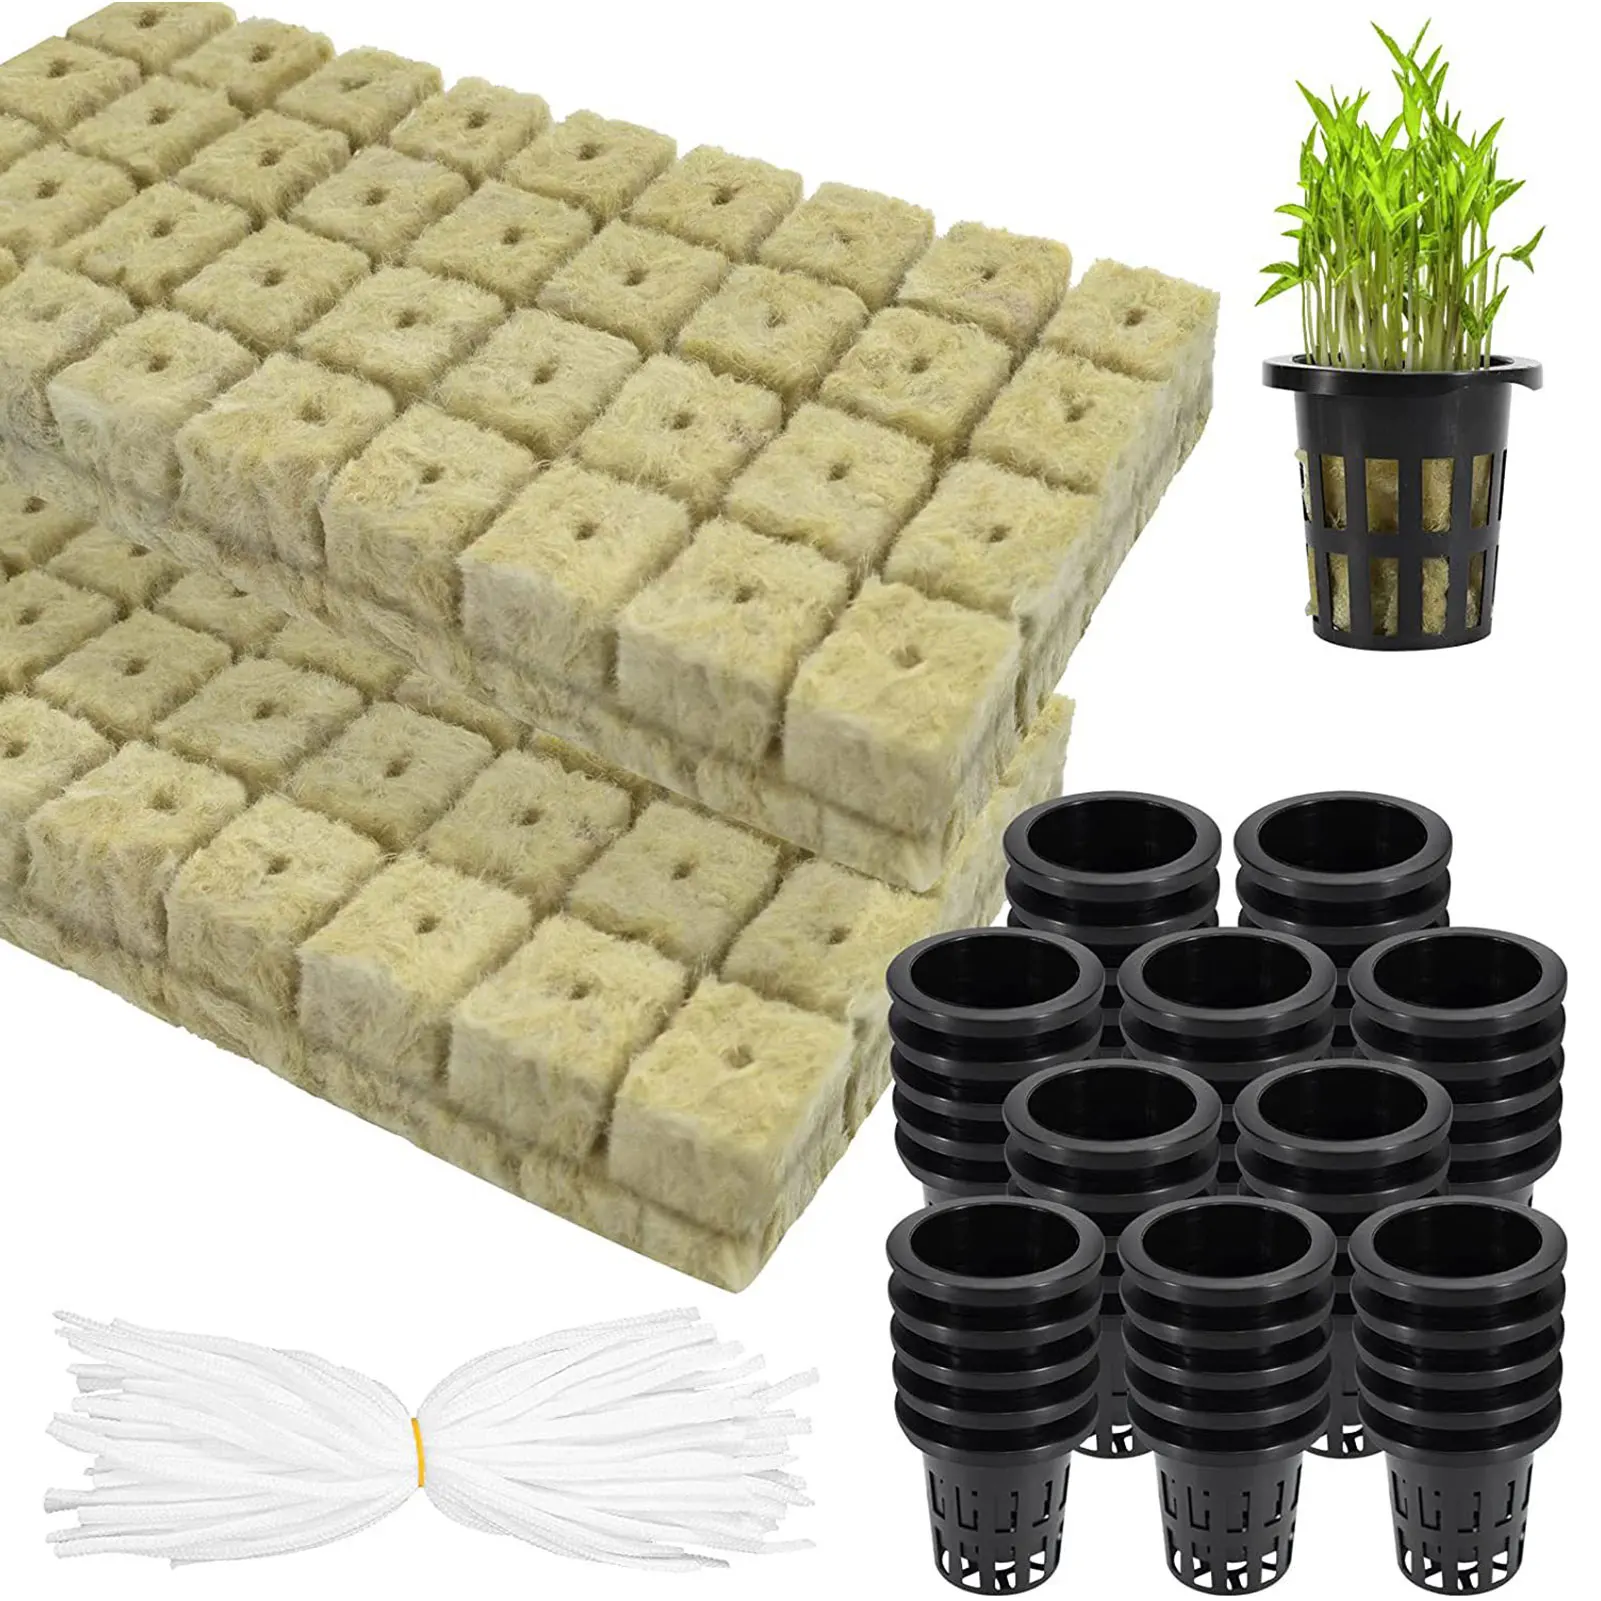 

50pcs Nursery Breathable Accessory Hydroponics Kit Slotted Cup Plant Cultivation Rock Wool Cube Multifunctional Garden Supplies